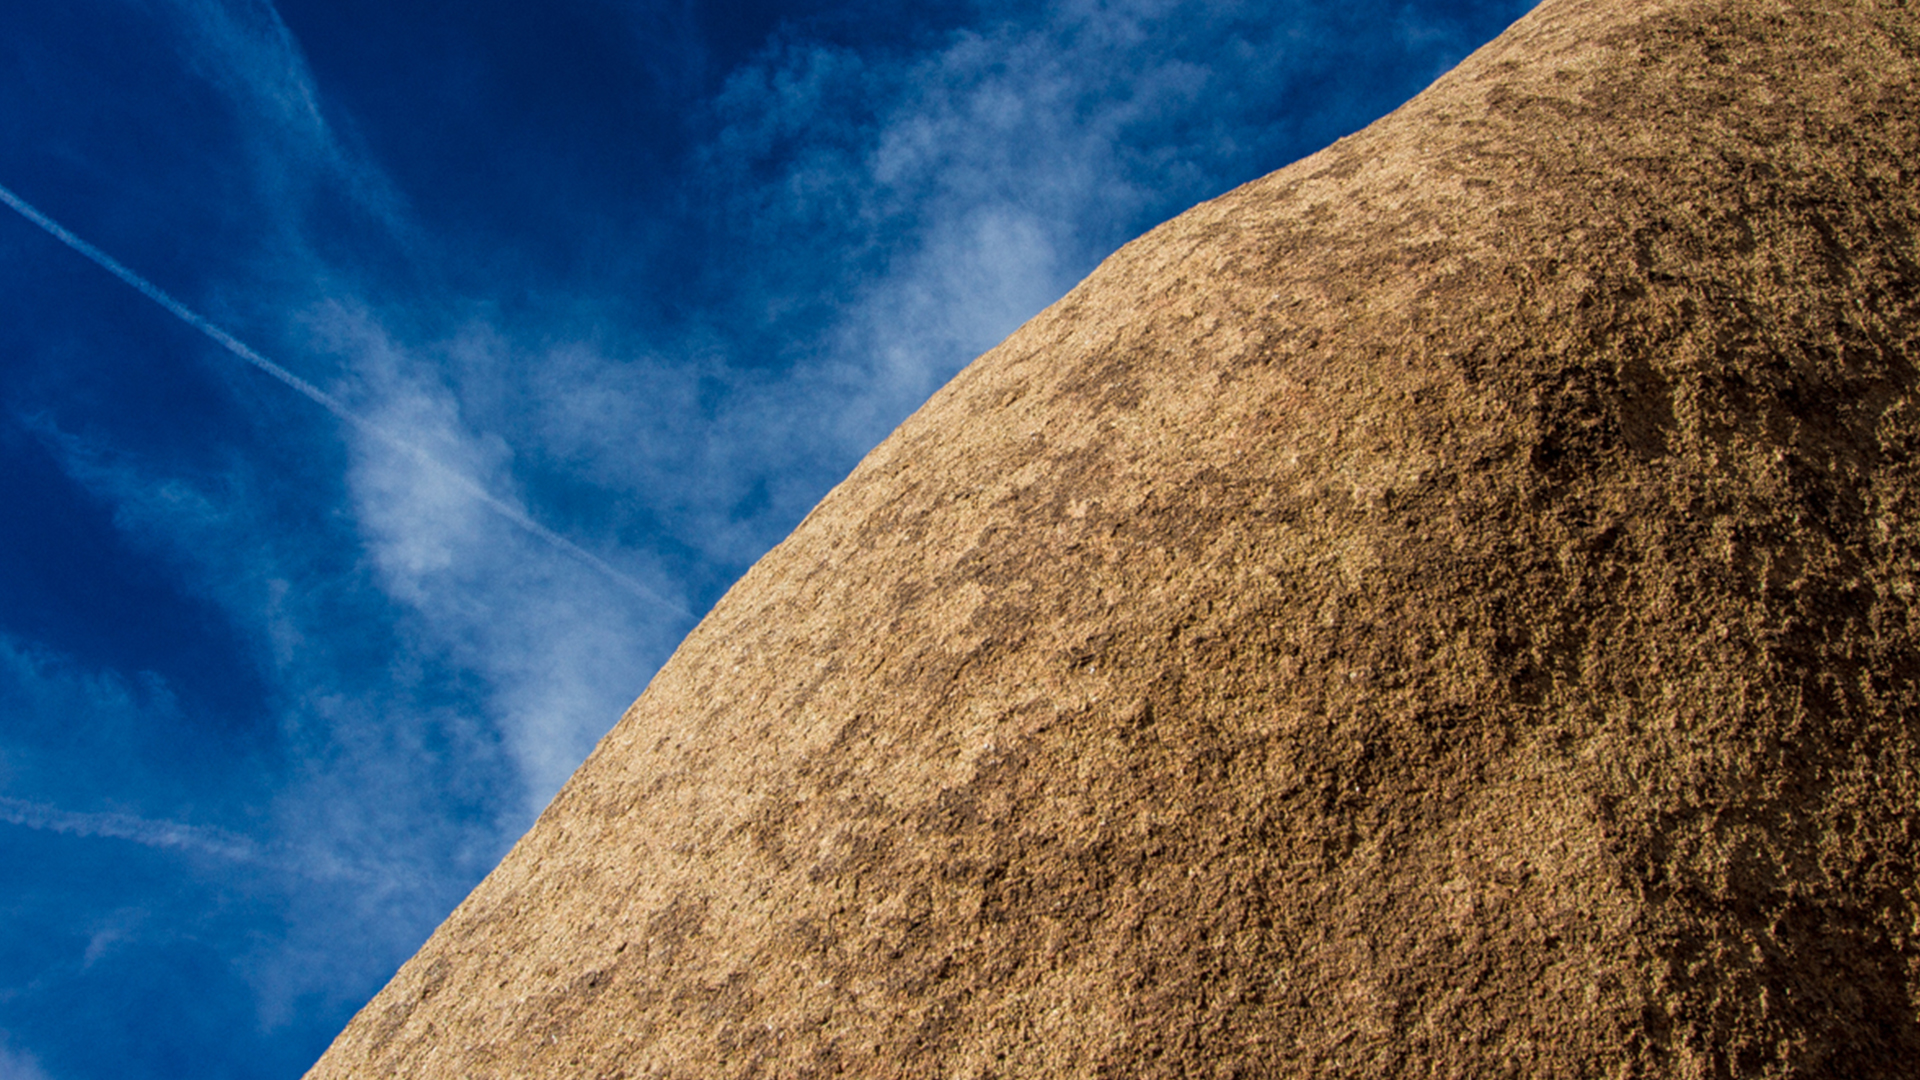 a bright blue sky, contrasting a low angled granite rock face